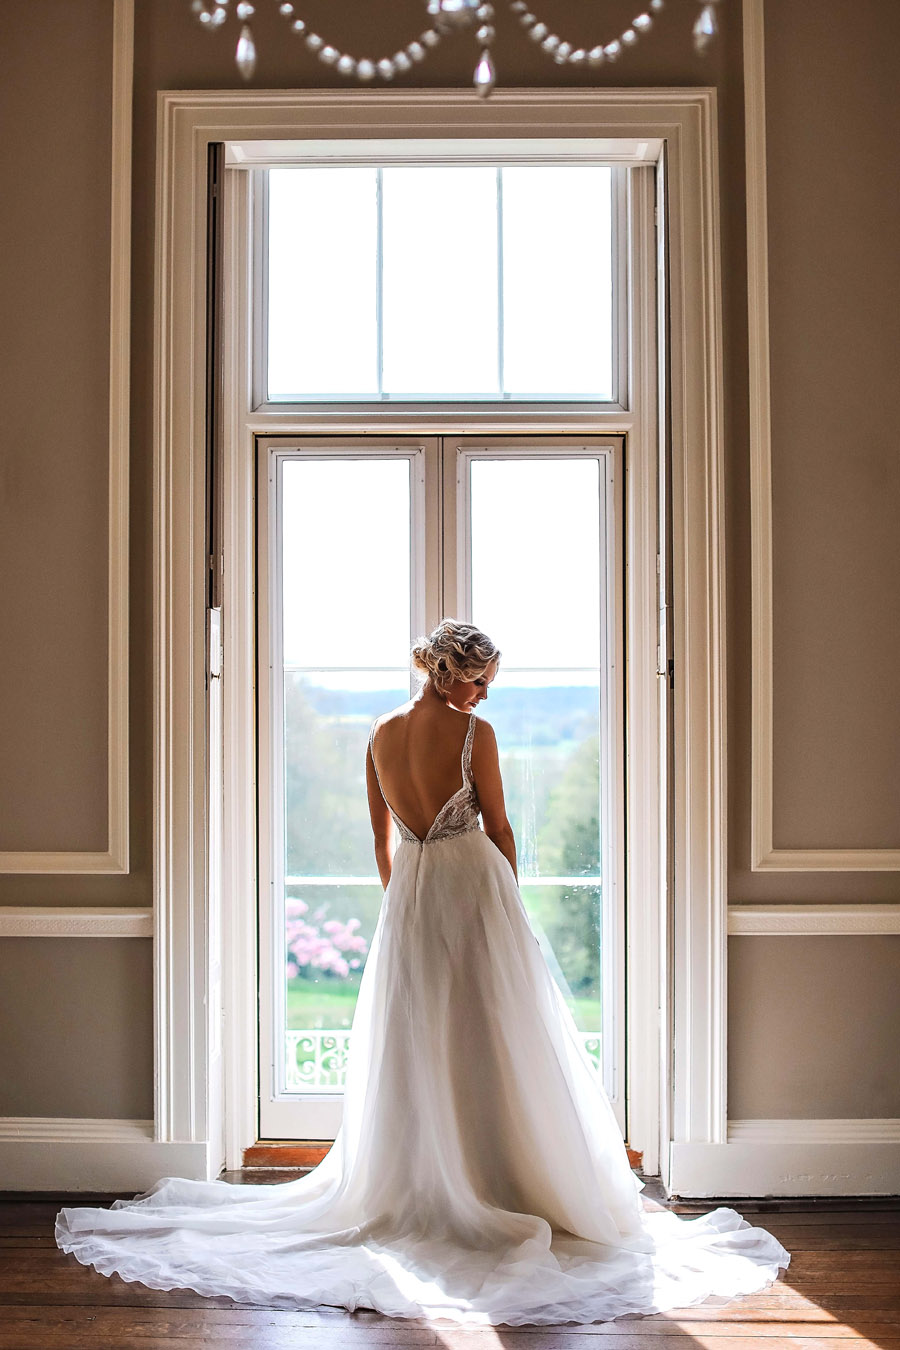 Romantic wedding ideas from Hale Park, photo by Charlotte Wise Photography (41)